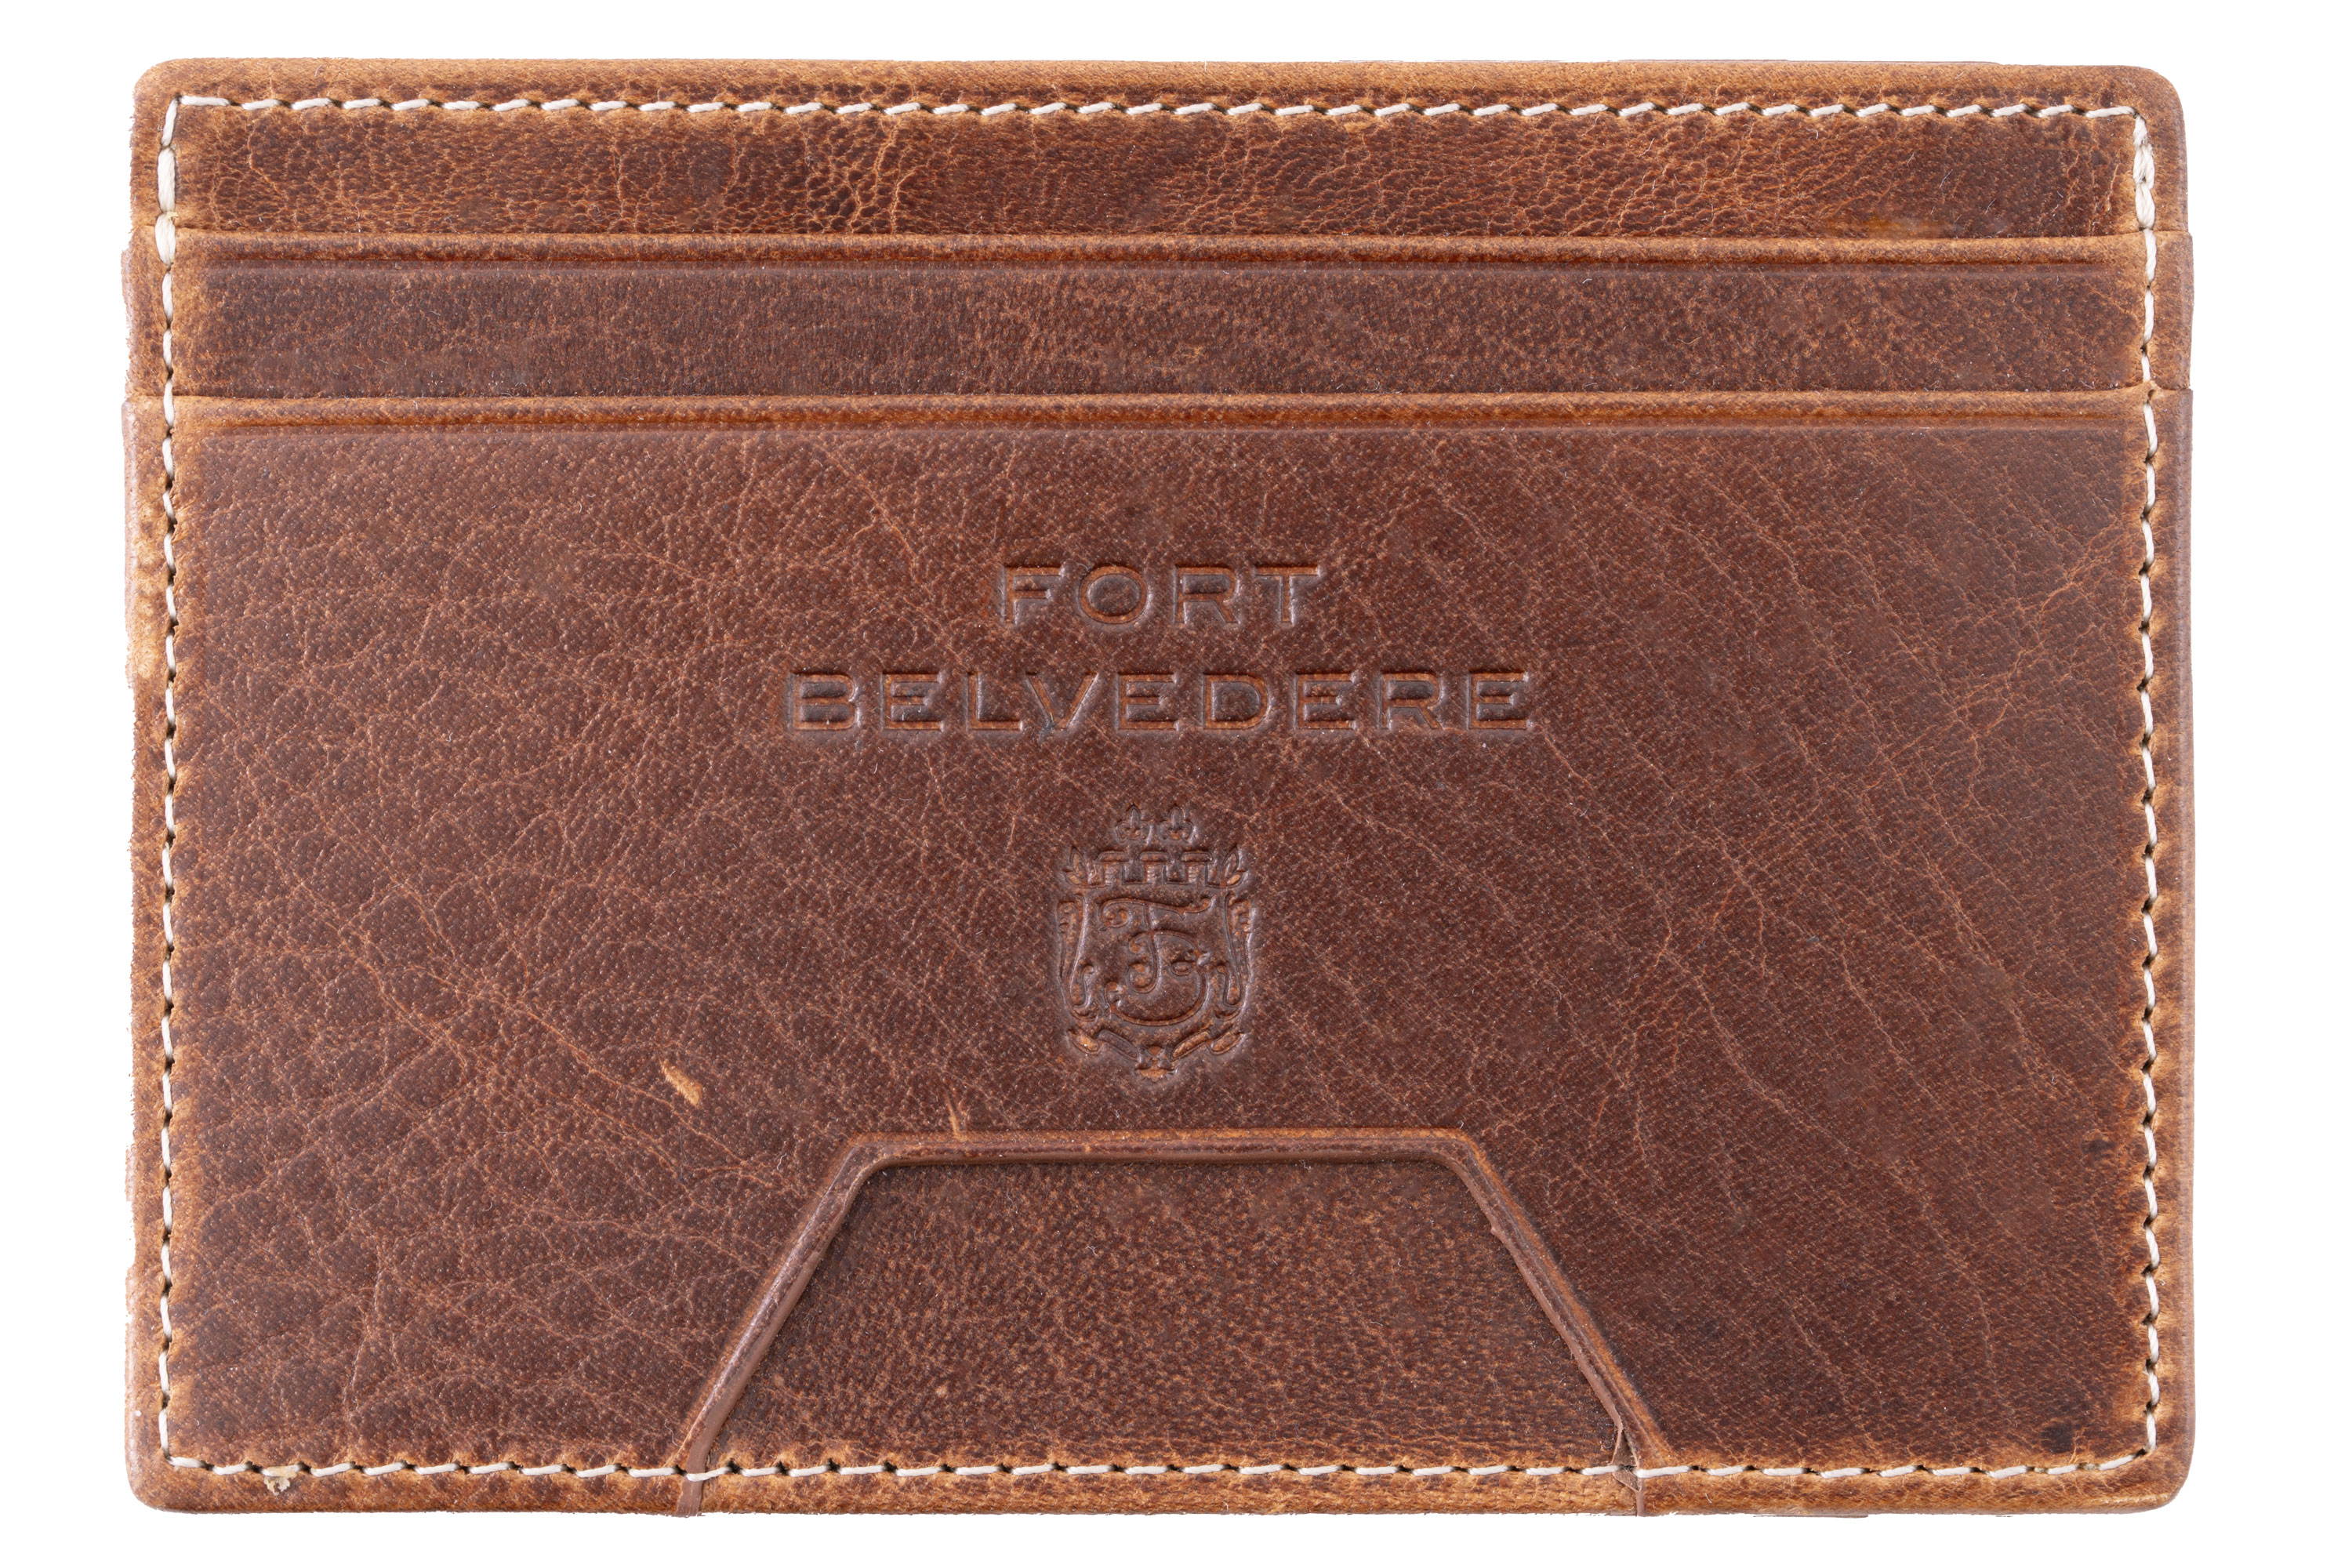 Slim Wallet - 4CC - Dumont Saddle Brown Full-Grain Leather front view